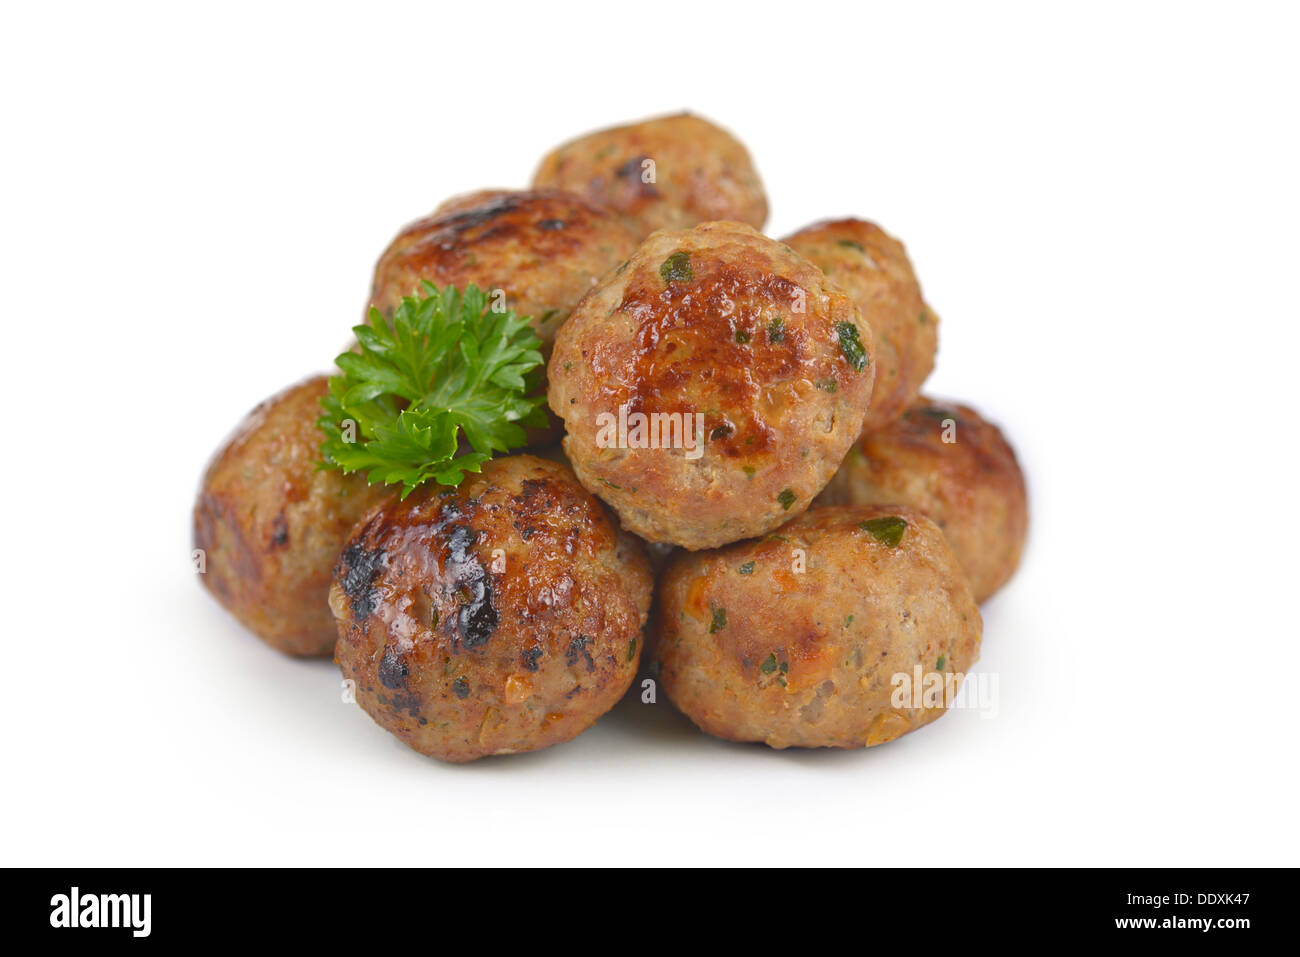 Meatballs, Fried, Cooked, Beef Stock Photo